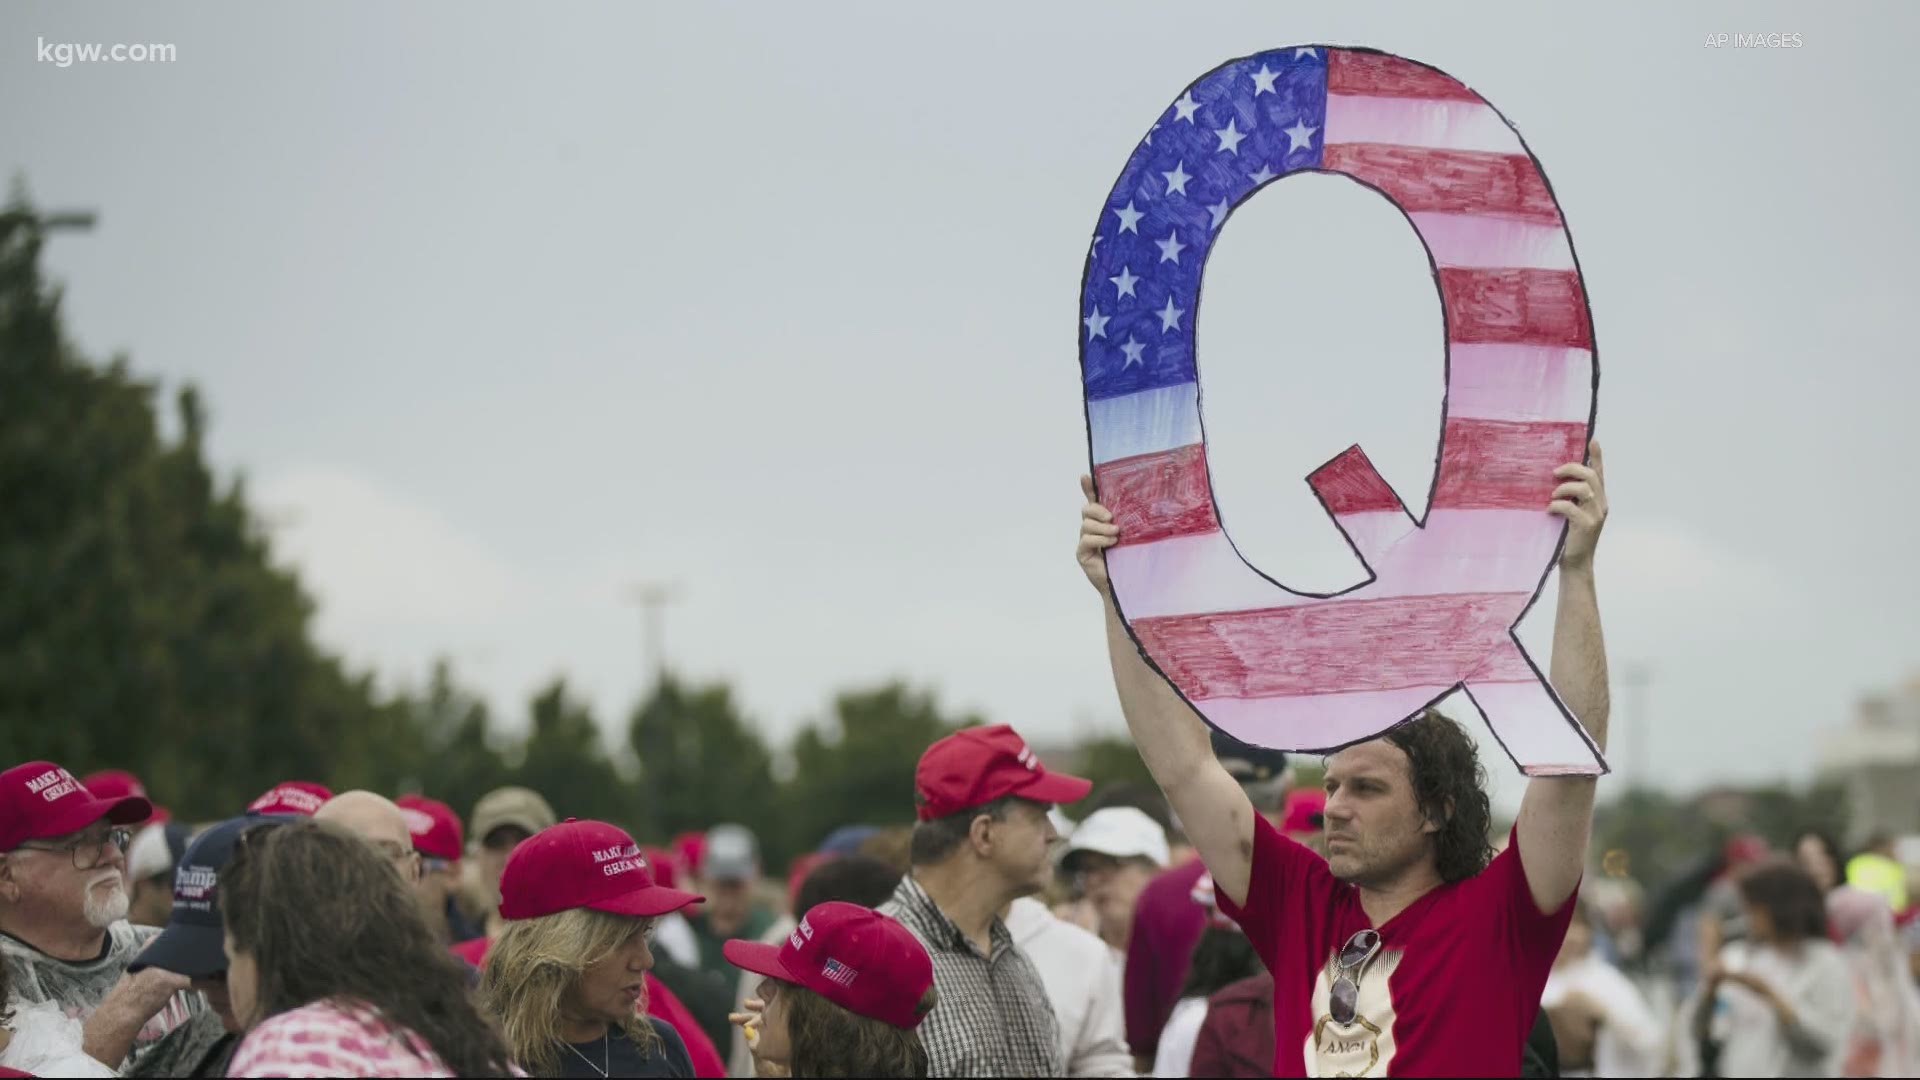 It's easy to write off QAnon as a wacky conspiracy theory. But it's become widespread -- and in some cases, dangerous.